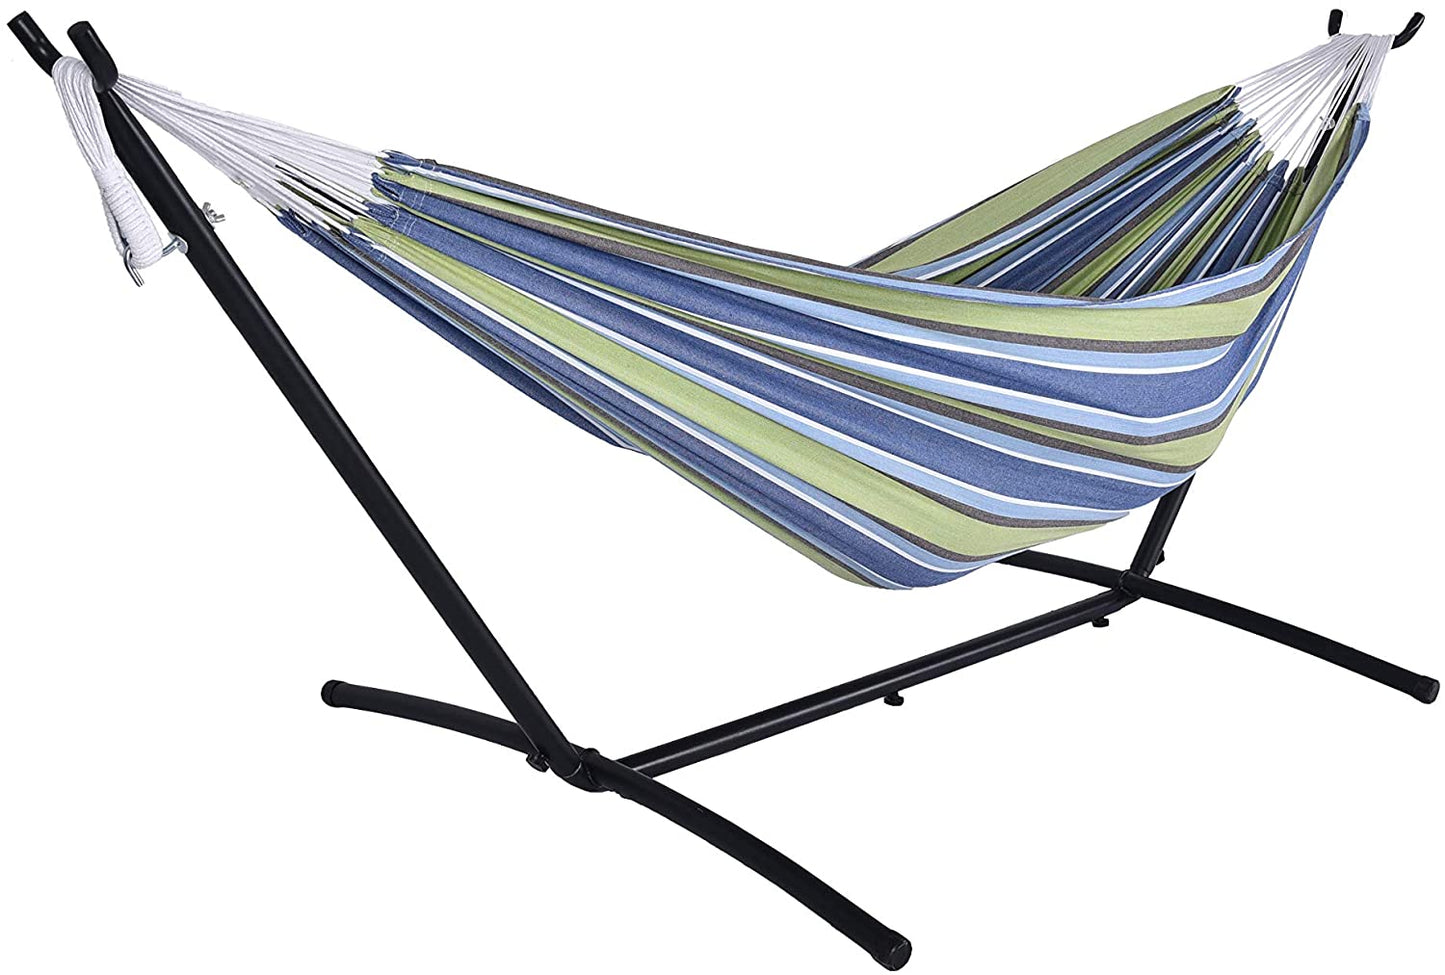 UNICOO- 2-Person Adjustable Indoor Outdoor Double Hammock Bed W/Carrying Bag, Steel Stand, 450 Pounds Capacity